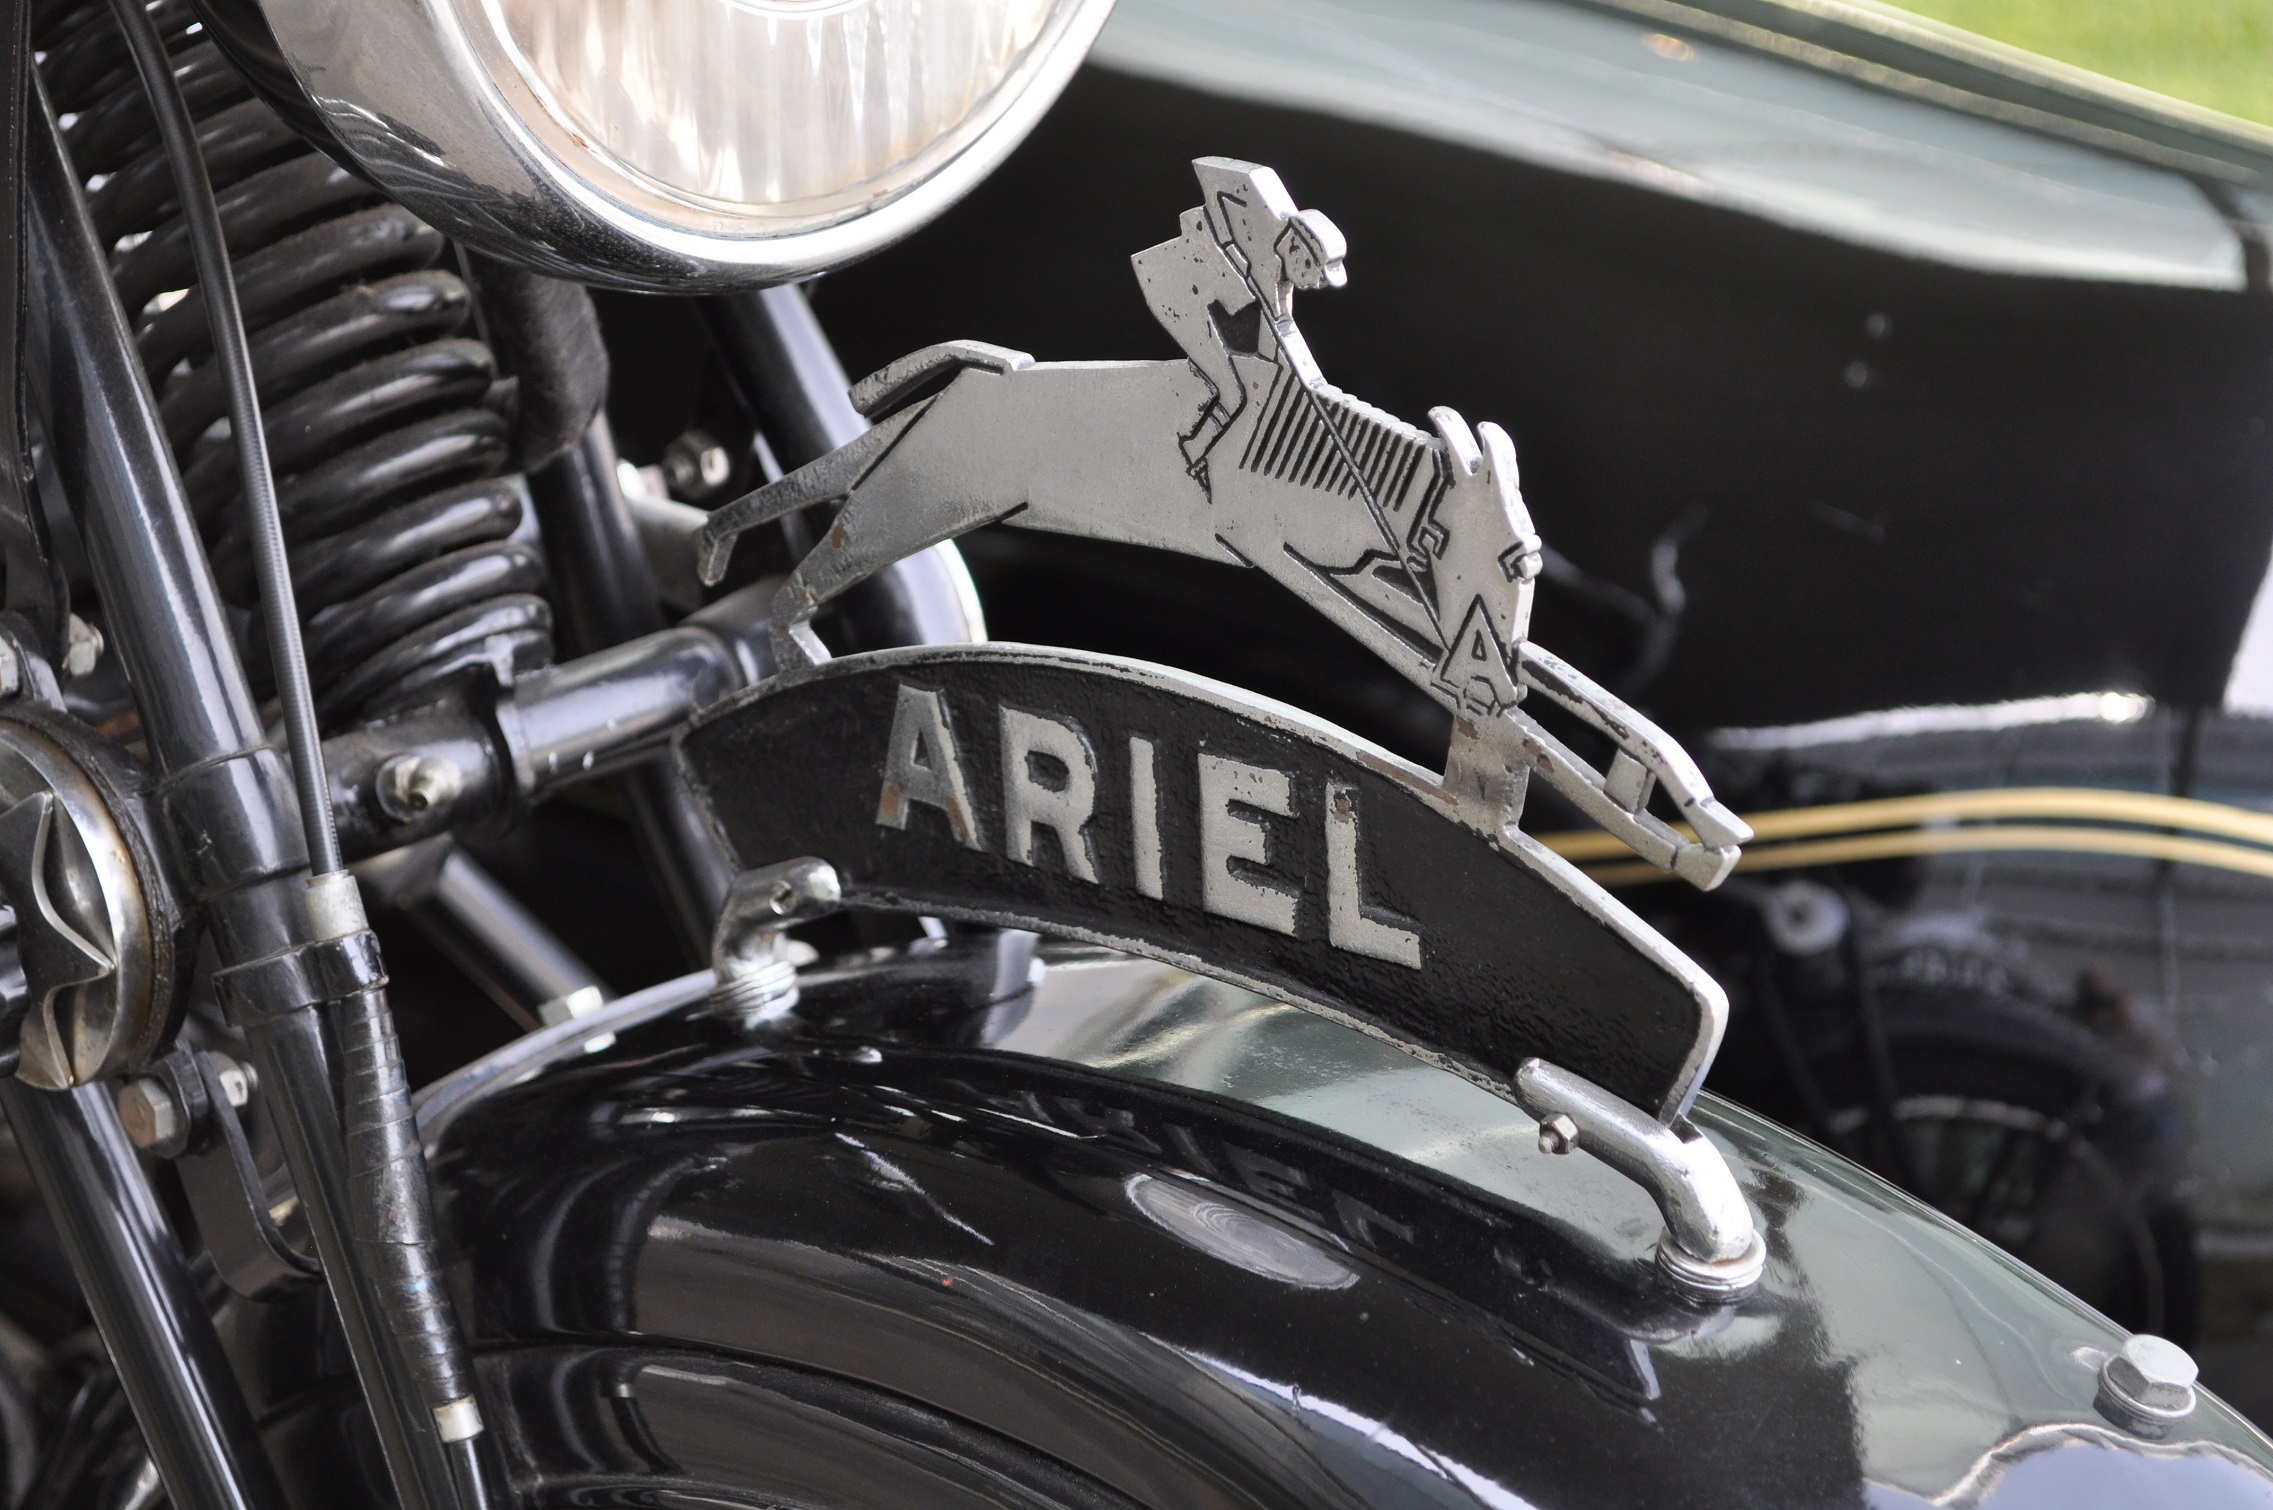 Ariel, 1932, Square Four with sidecar